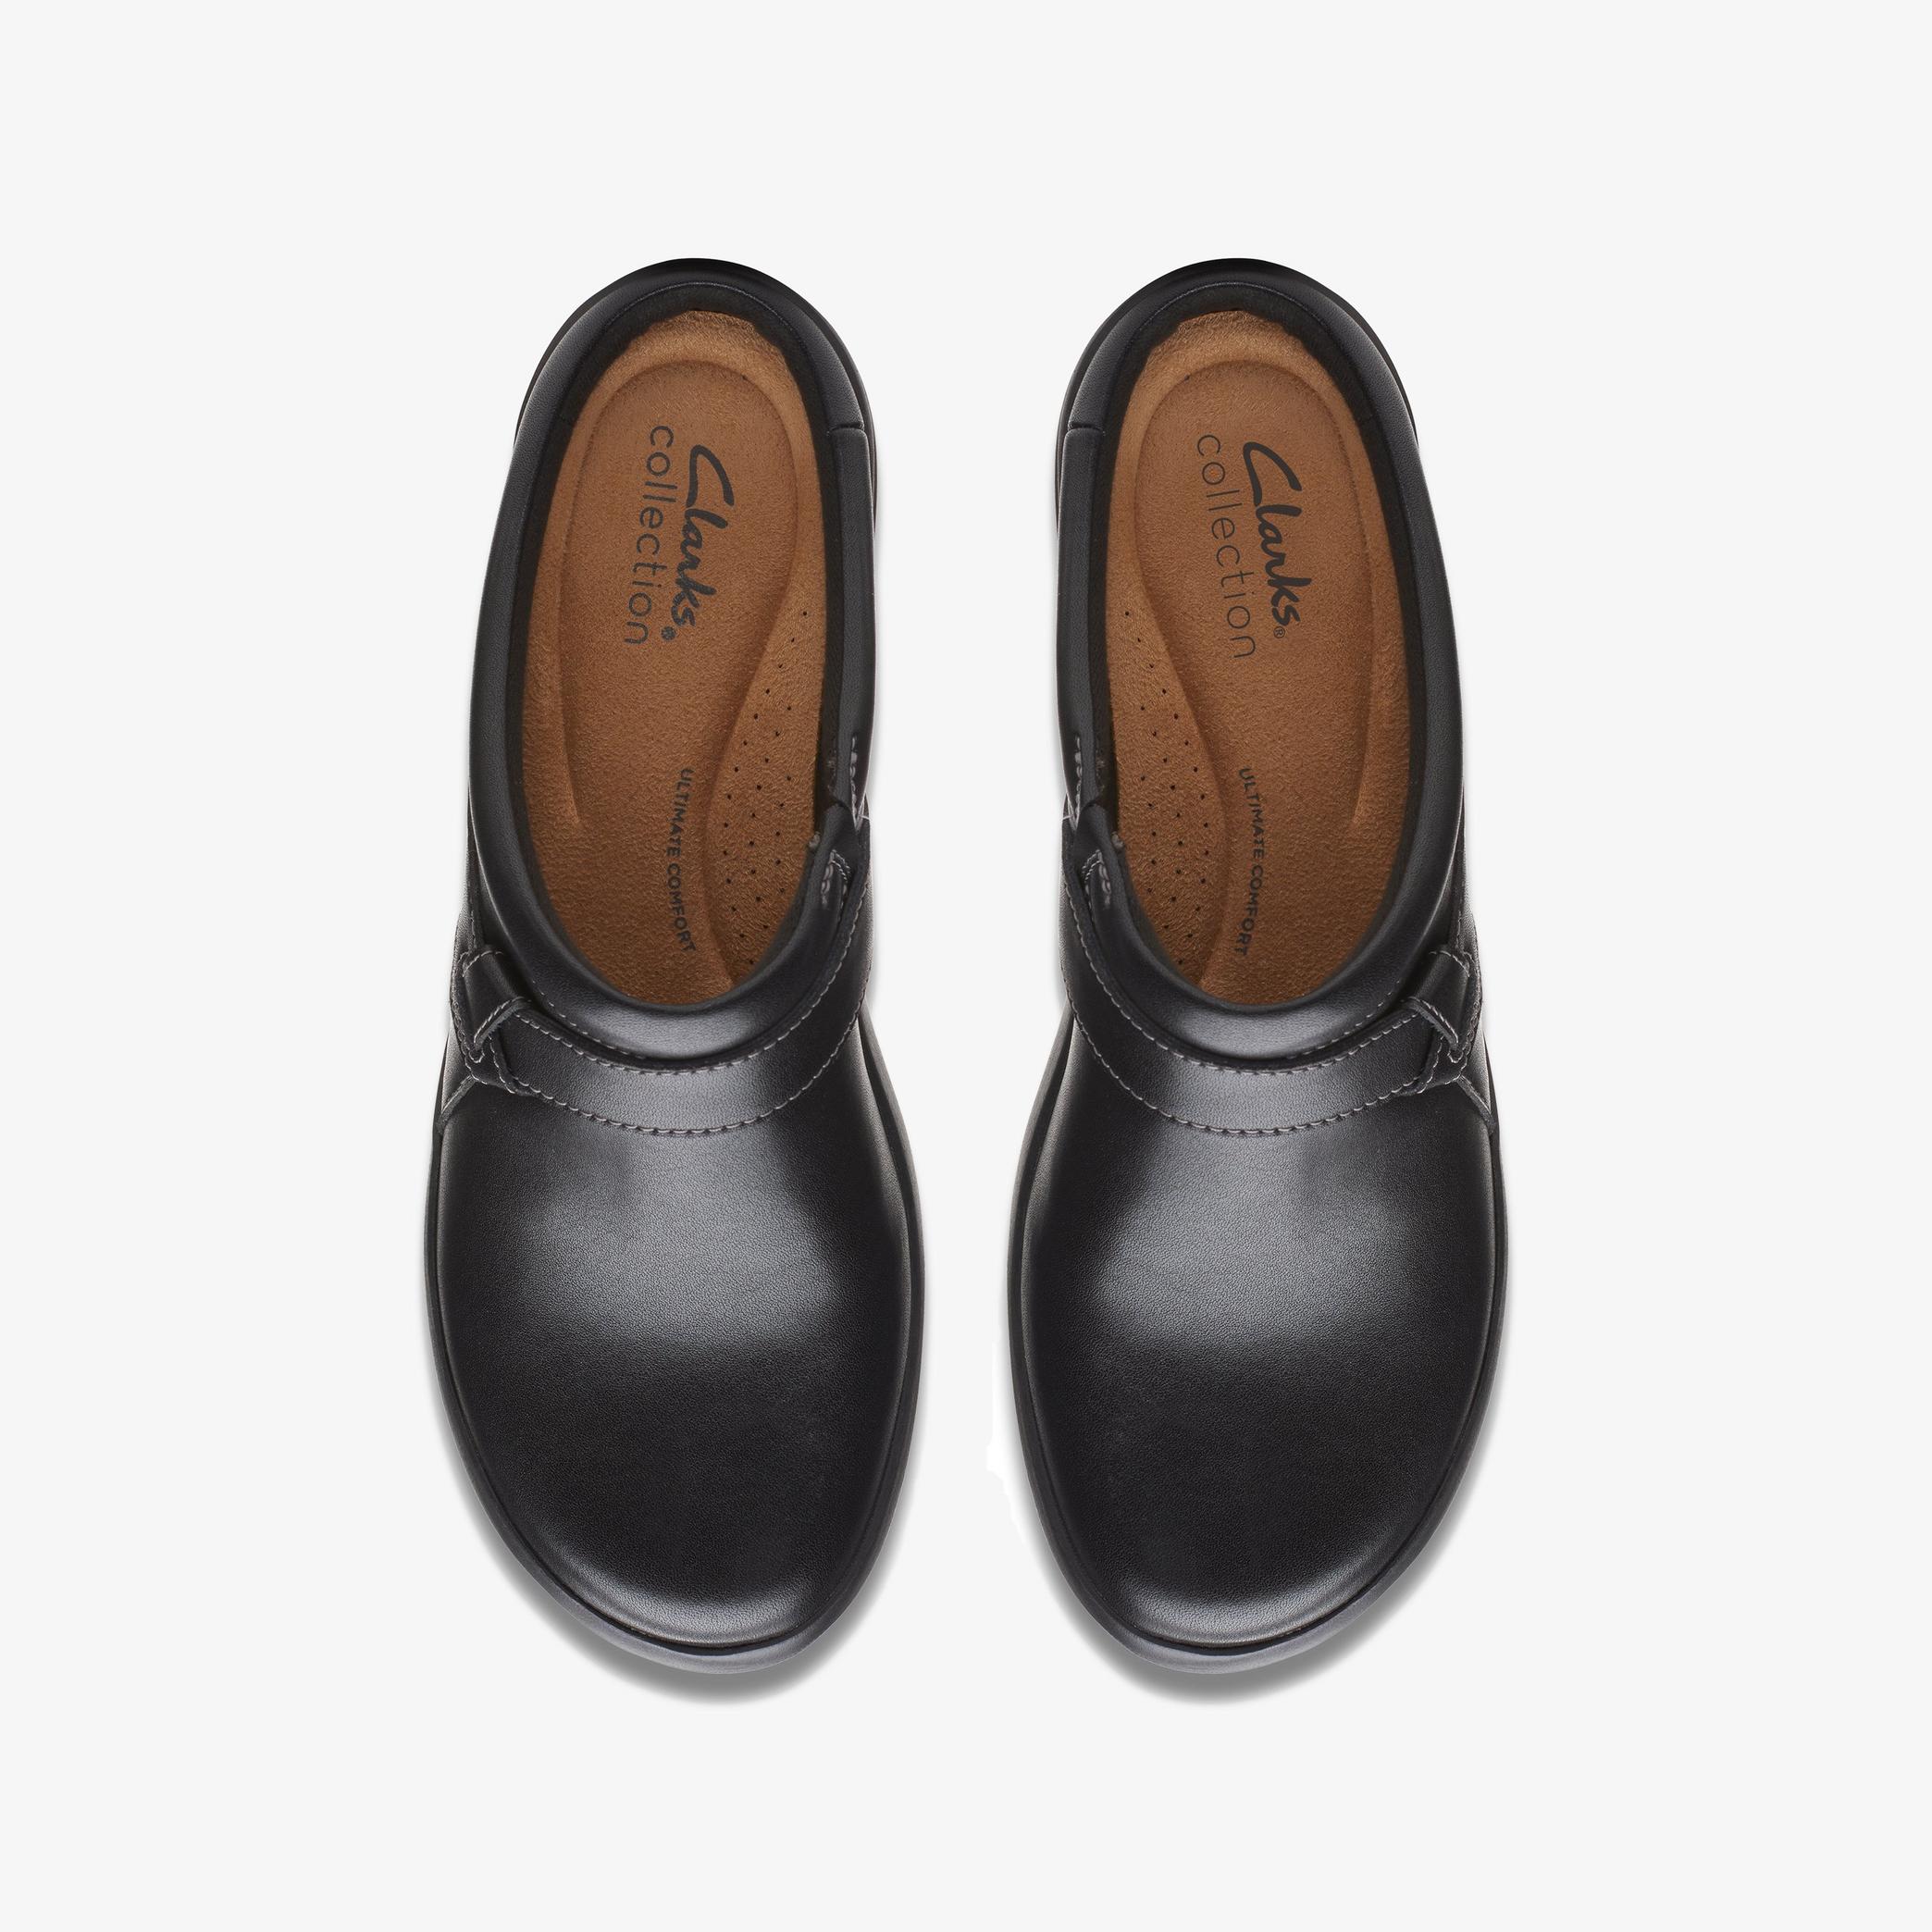 WOMENS Angie Mist Black Leather Mules | Clarks US